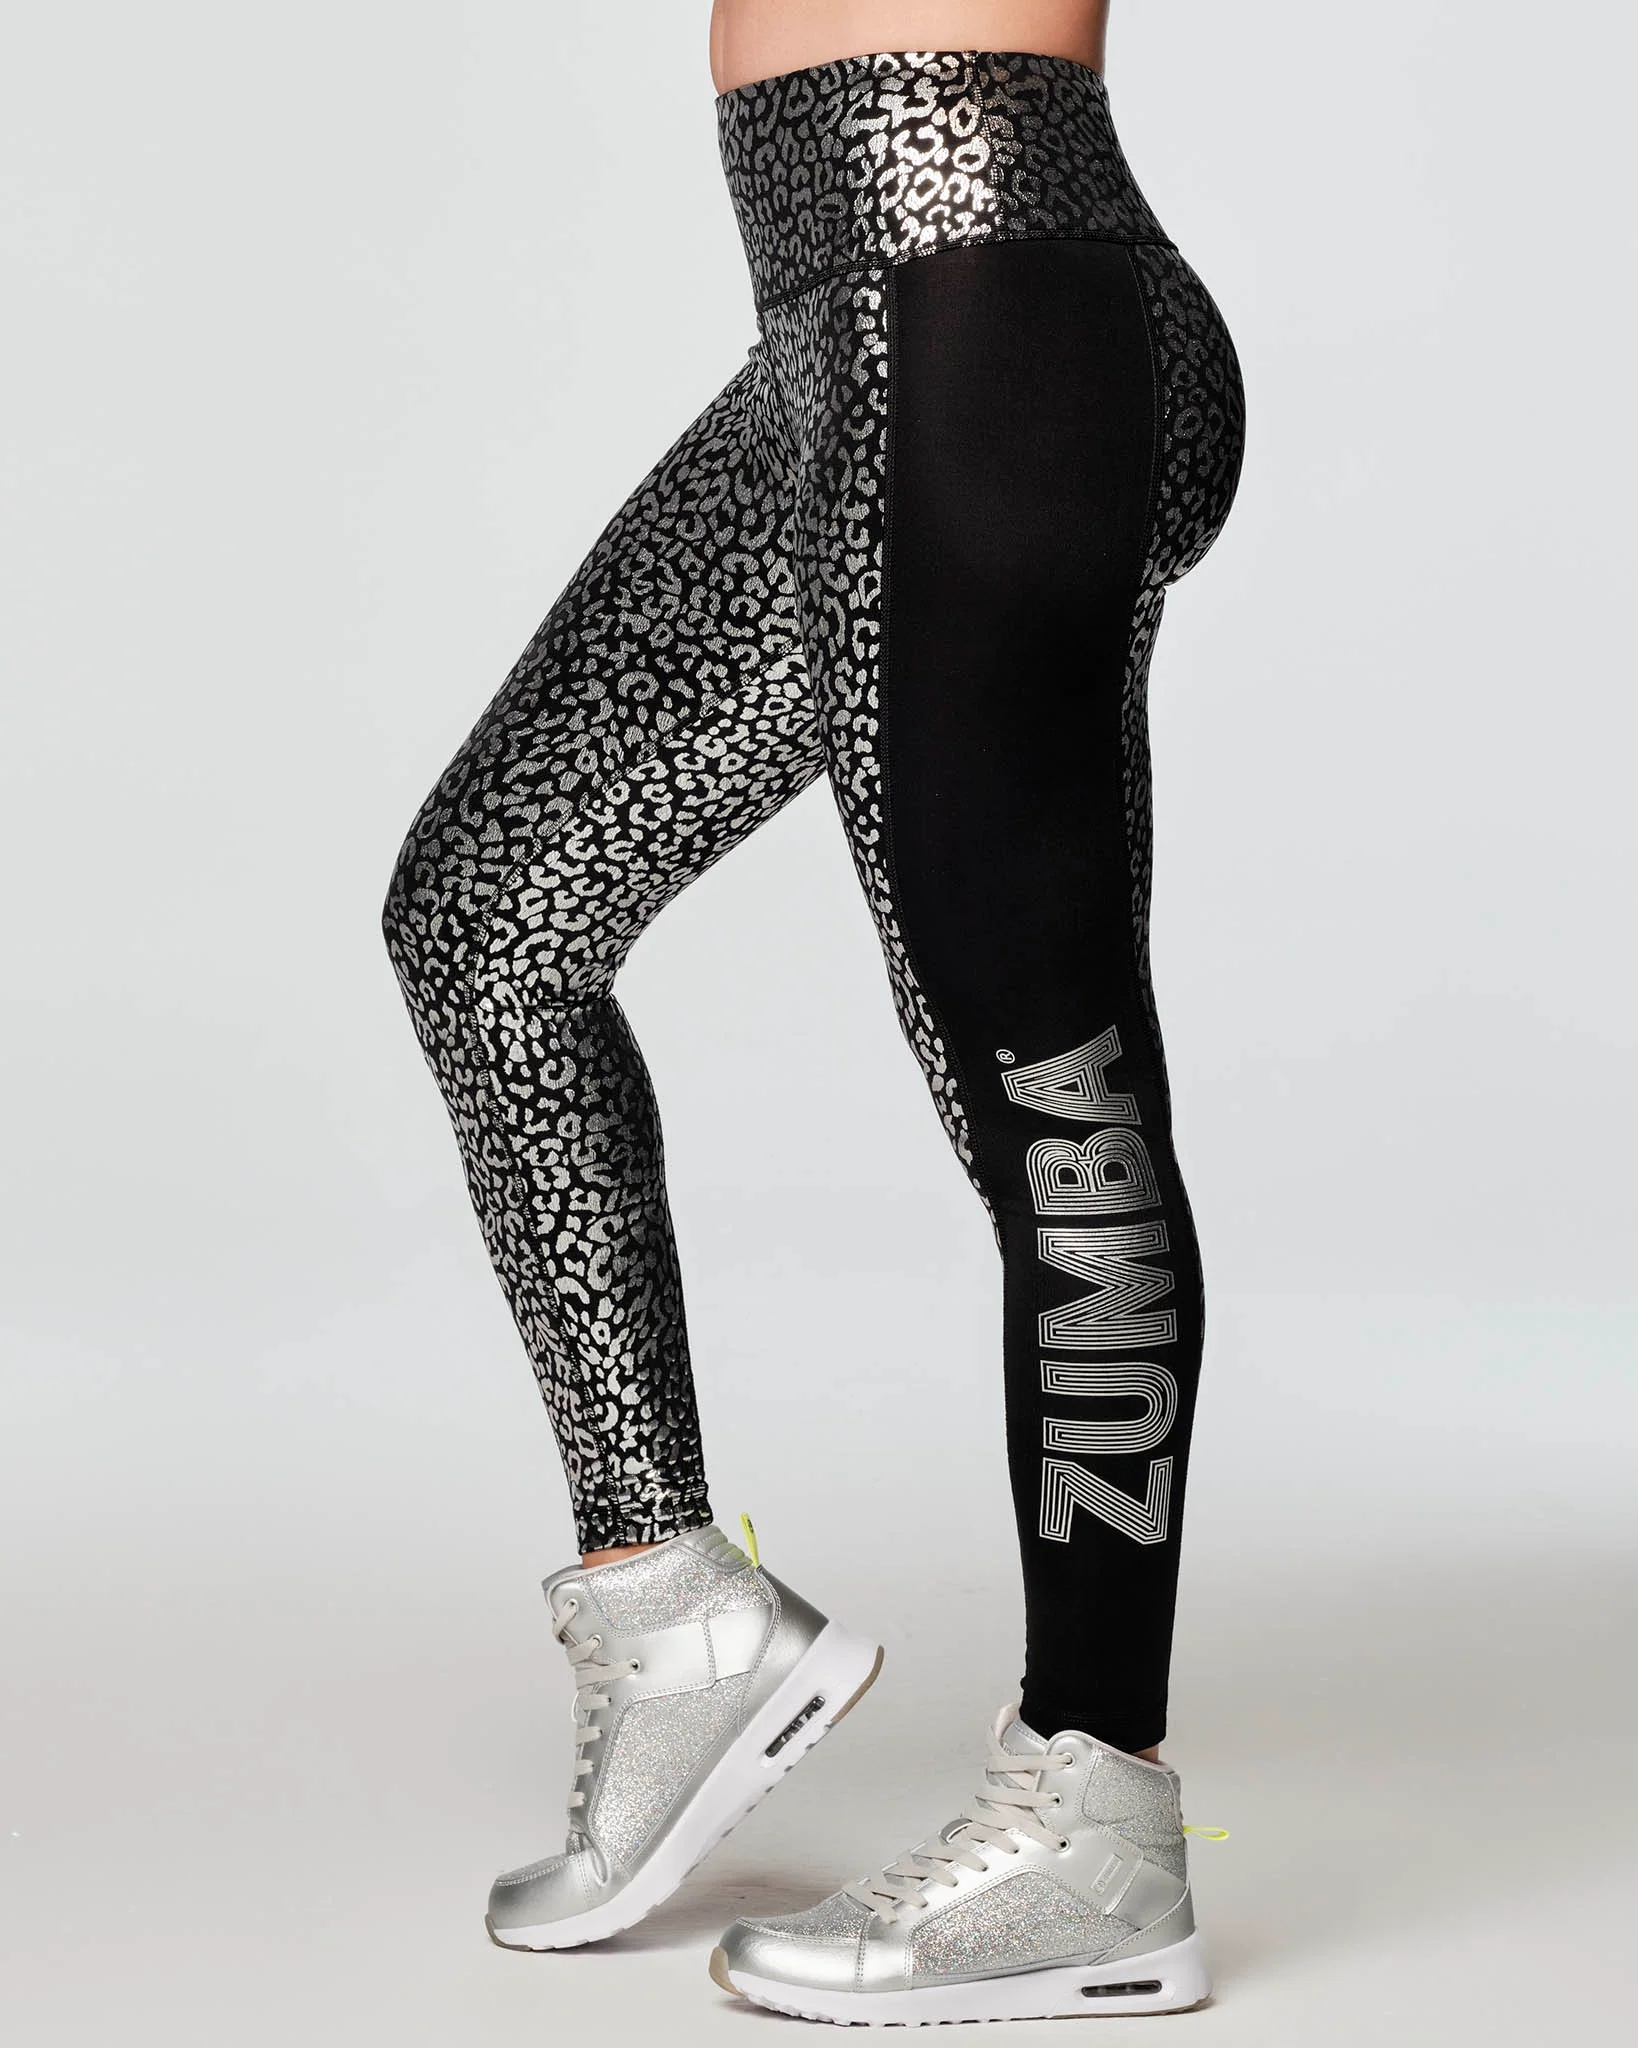 Zumba Glow With The Flow High Waisted Foil Leggings - Black